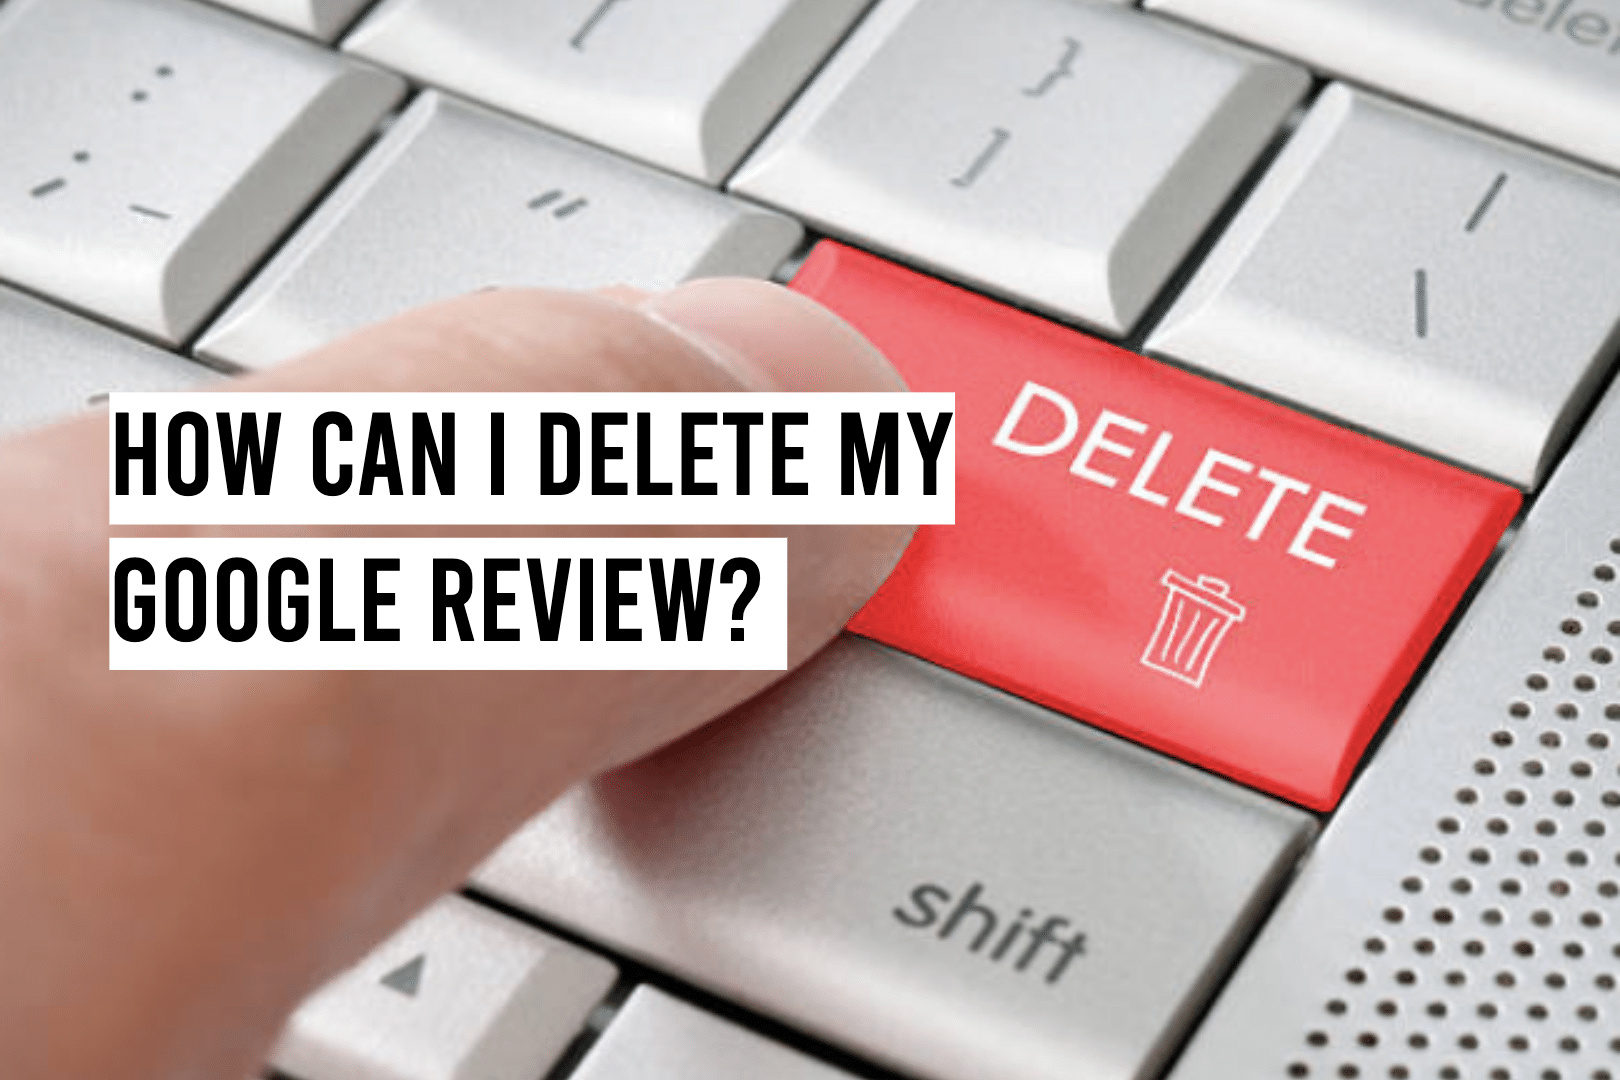 How Can I Delete My Google Review